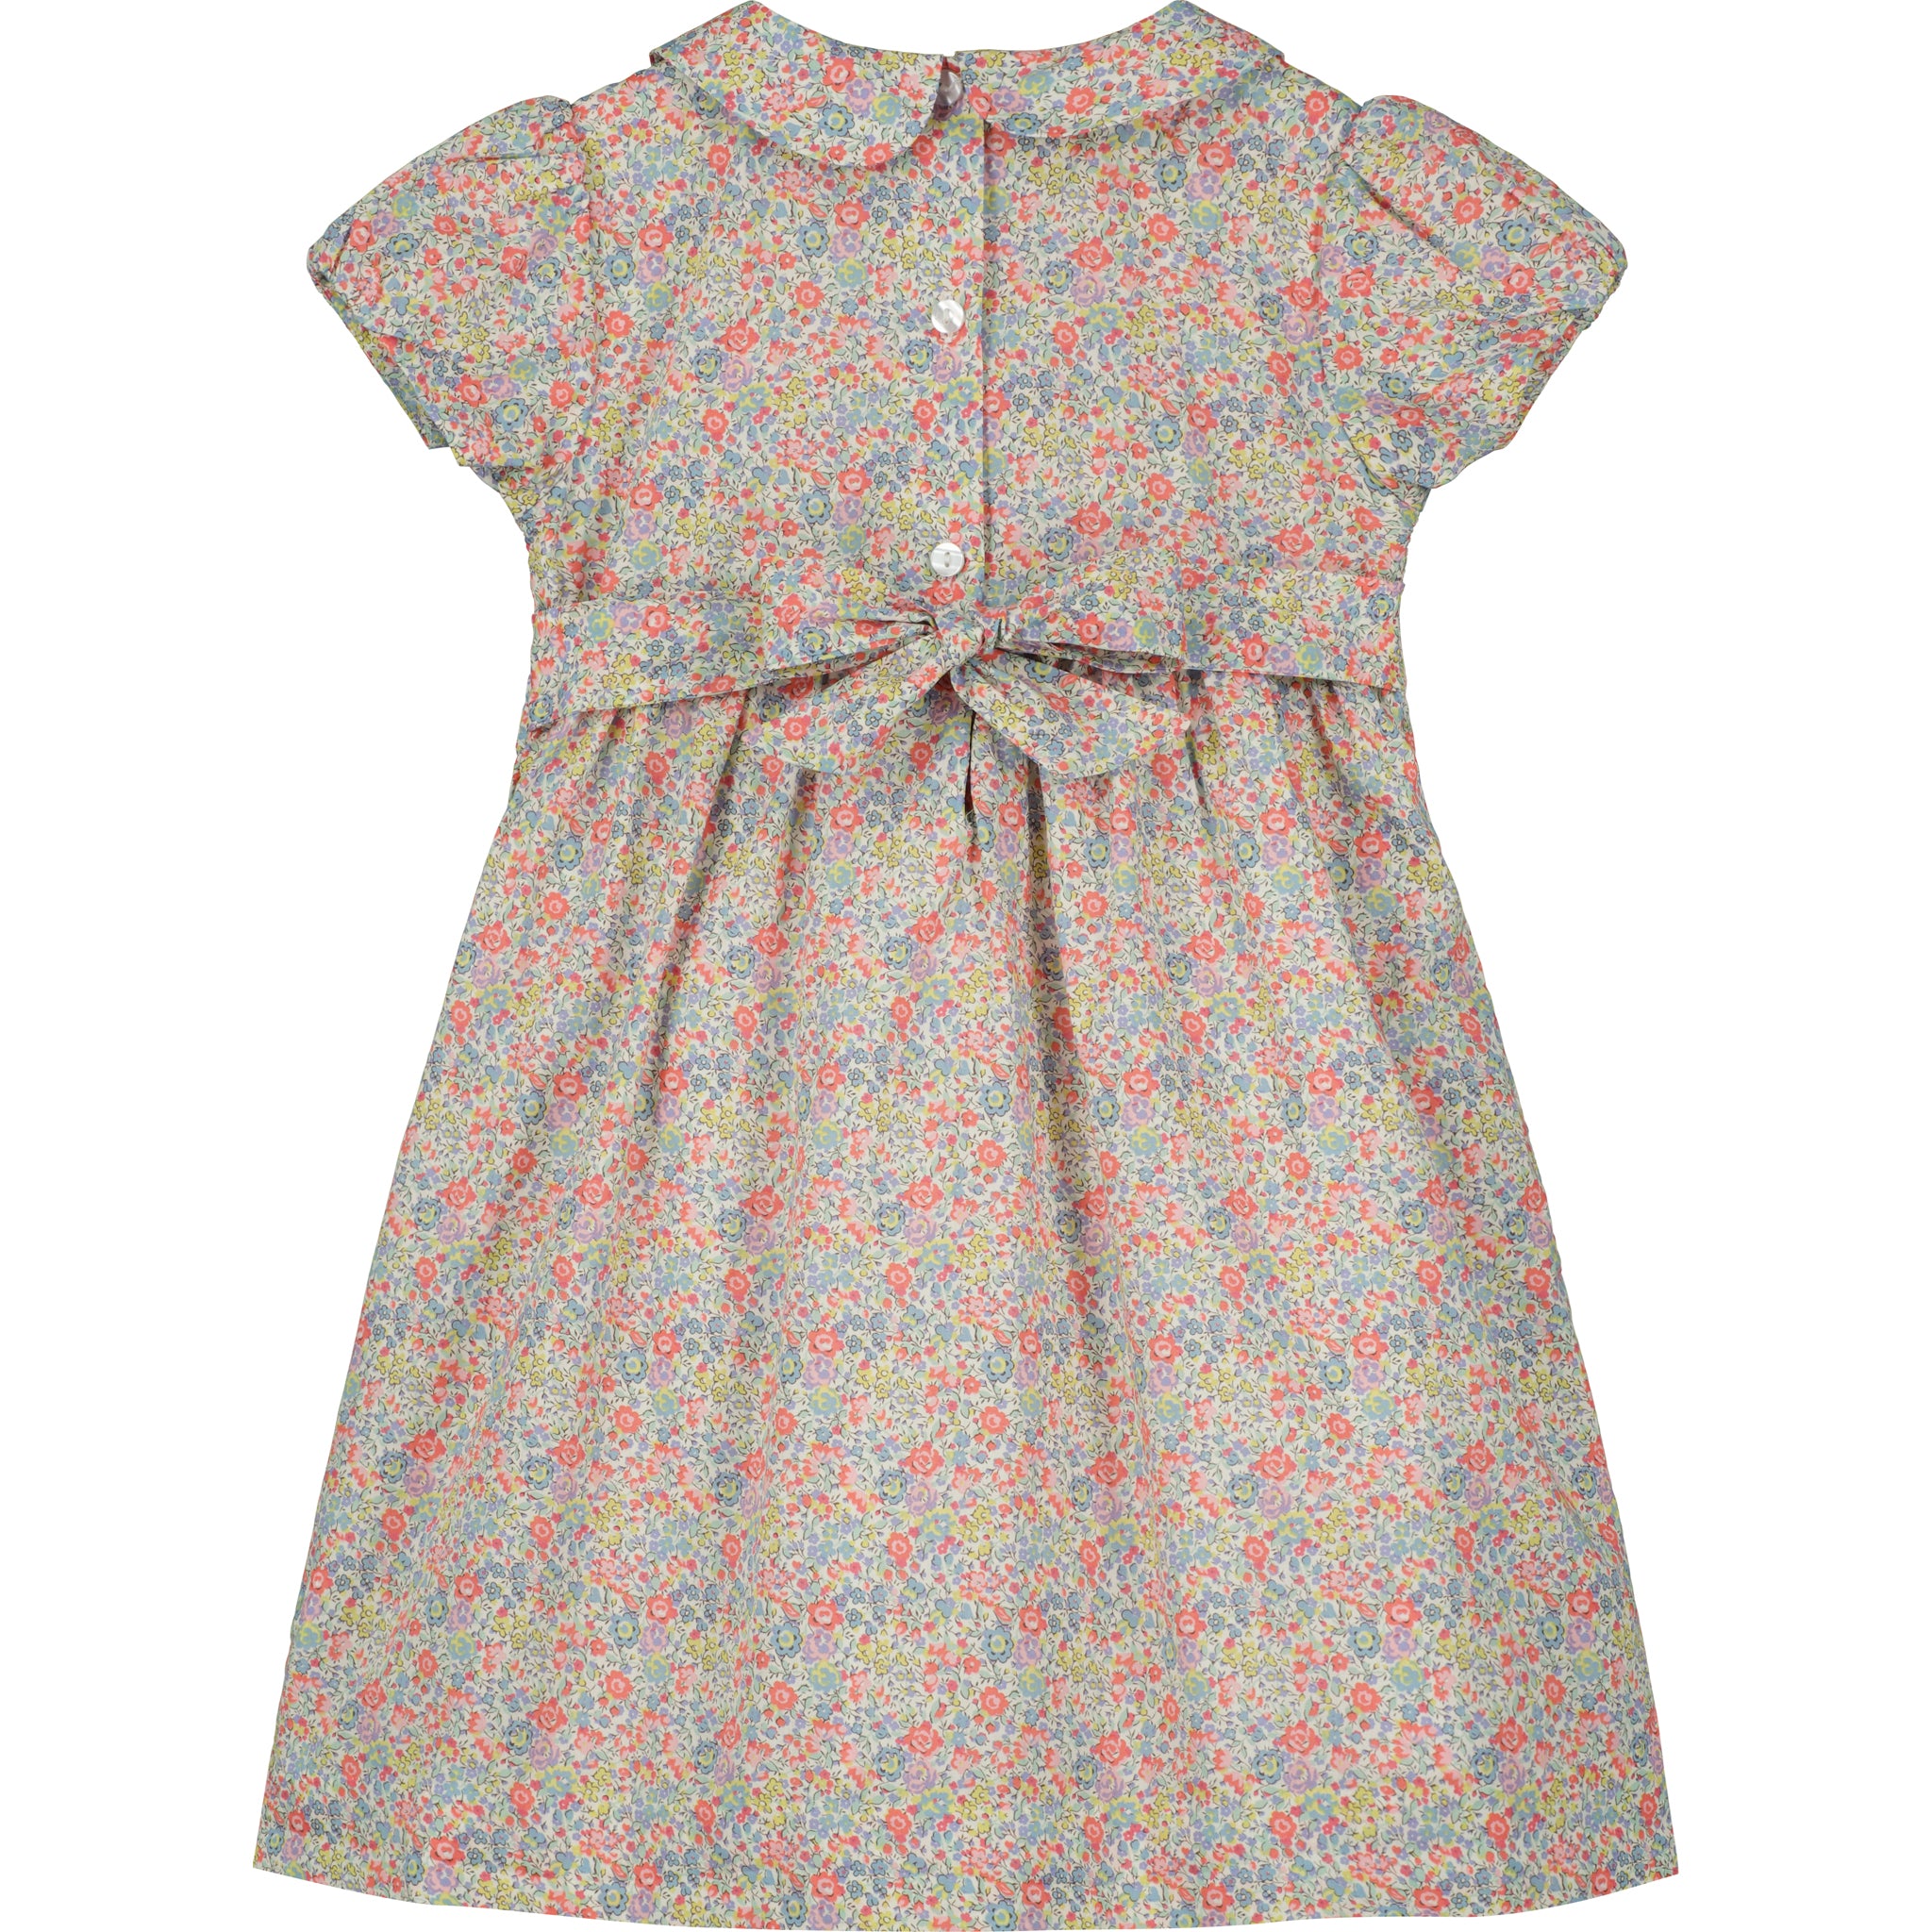 Floral Liberty girls dress with smocking, back